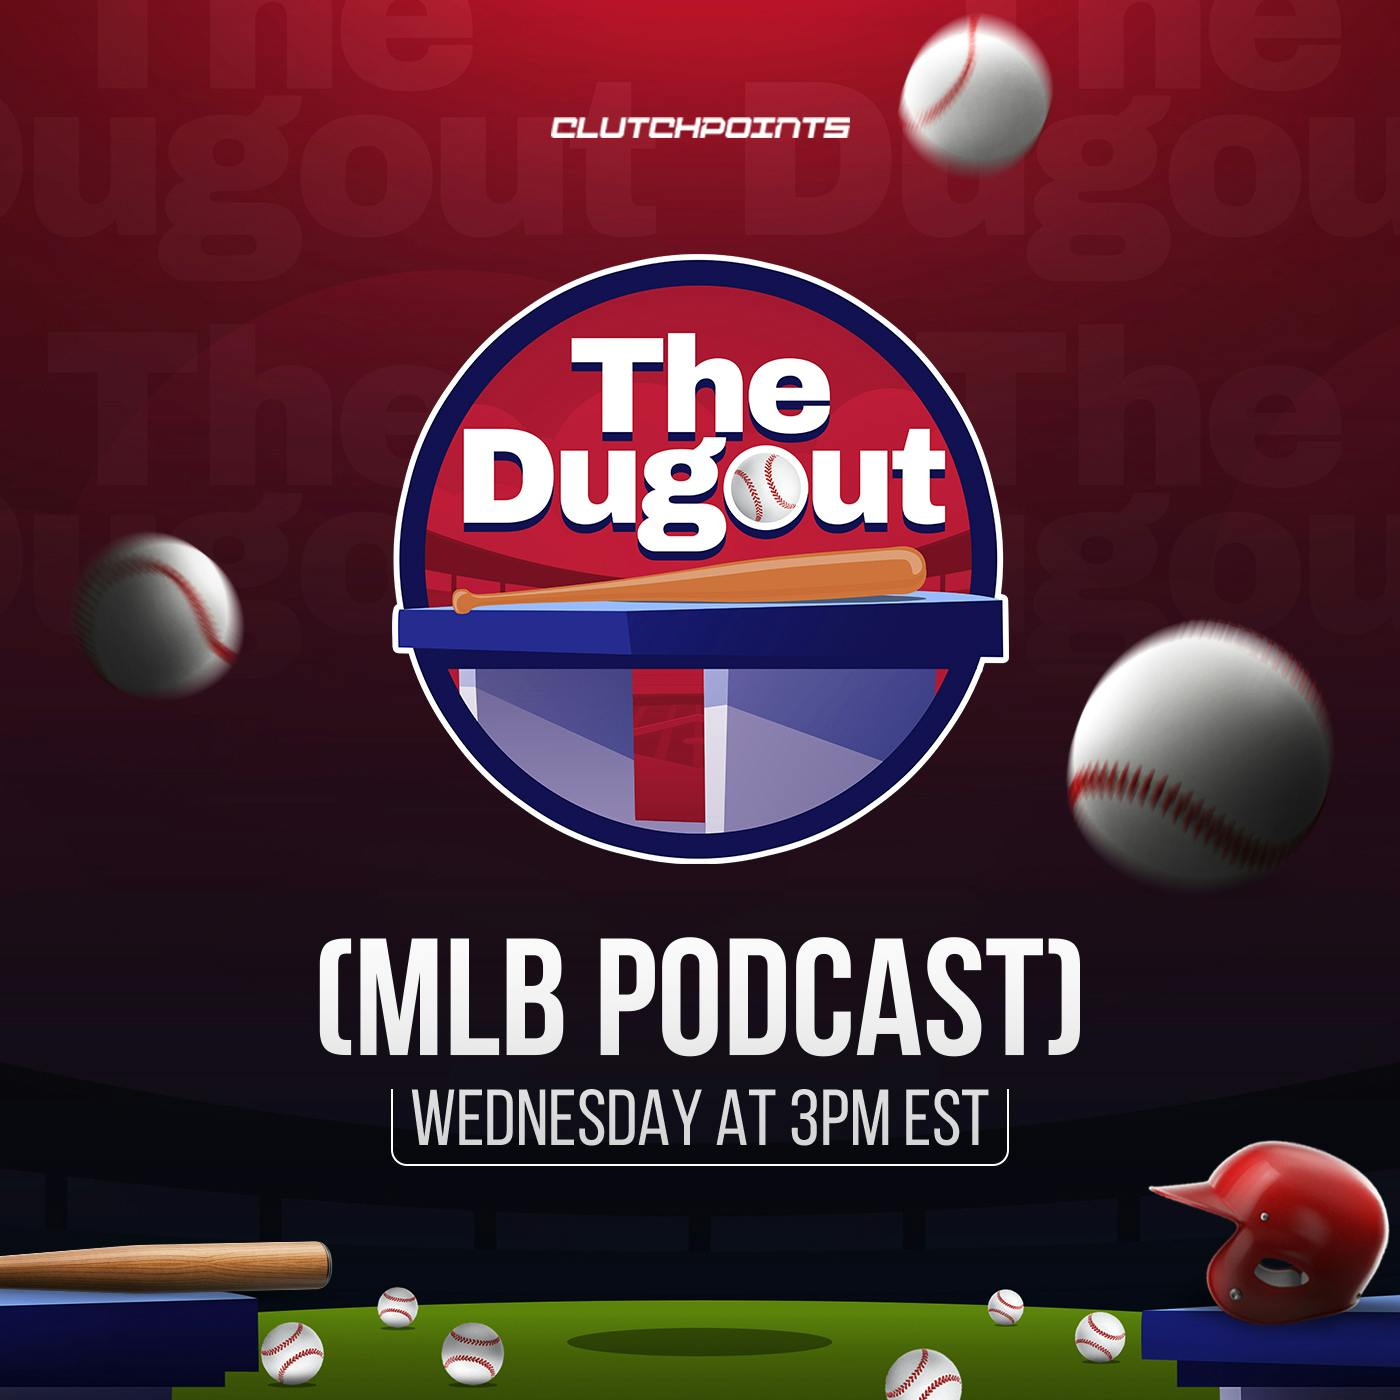 The Dugout - ClutchPoints